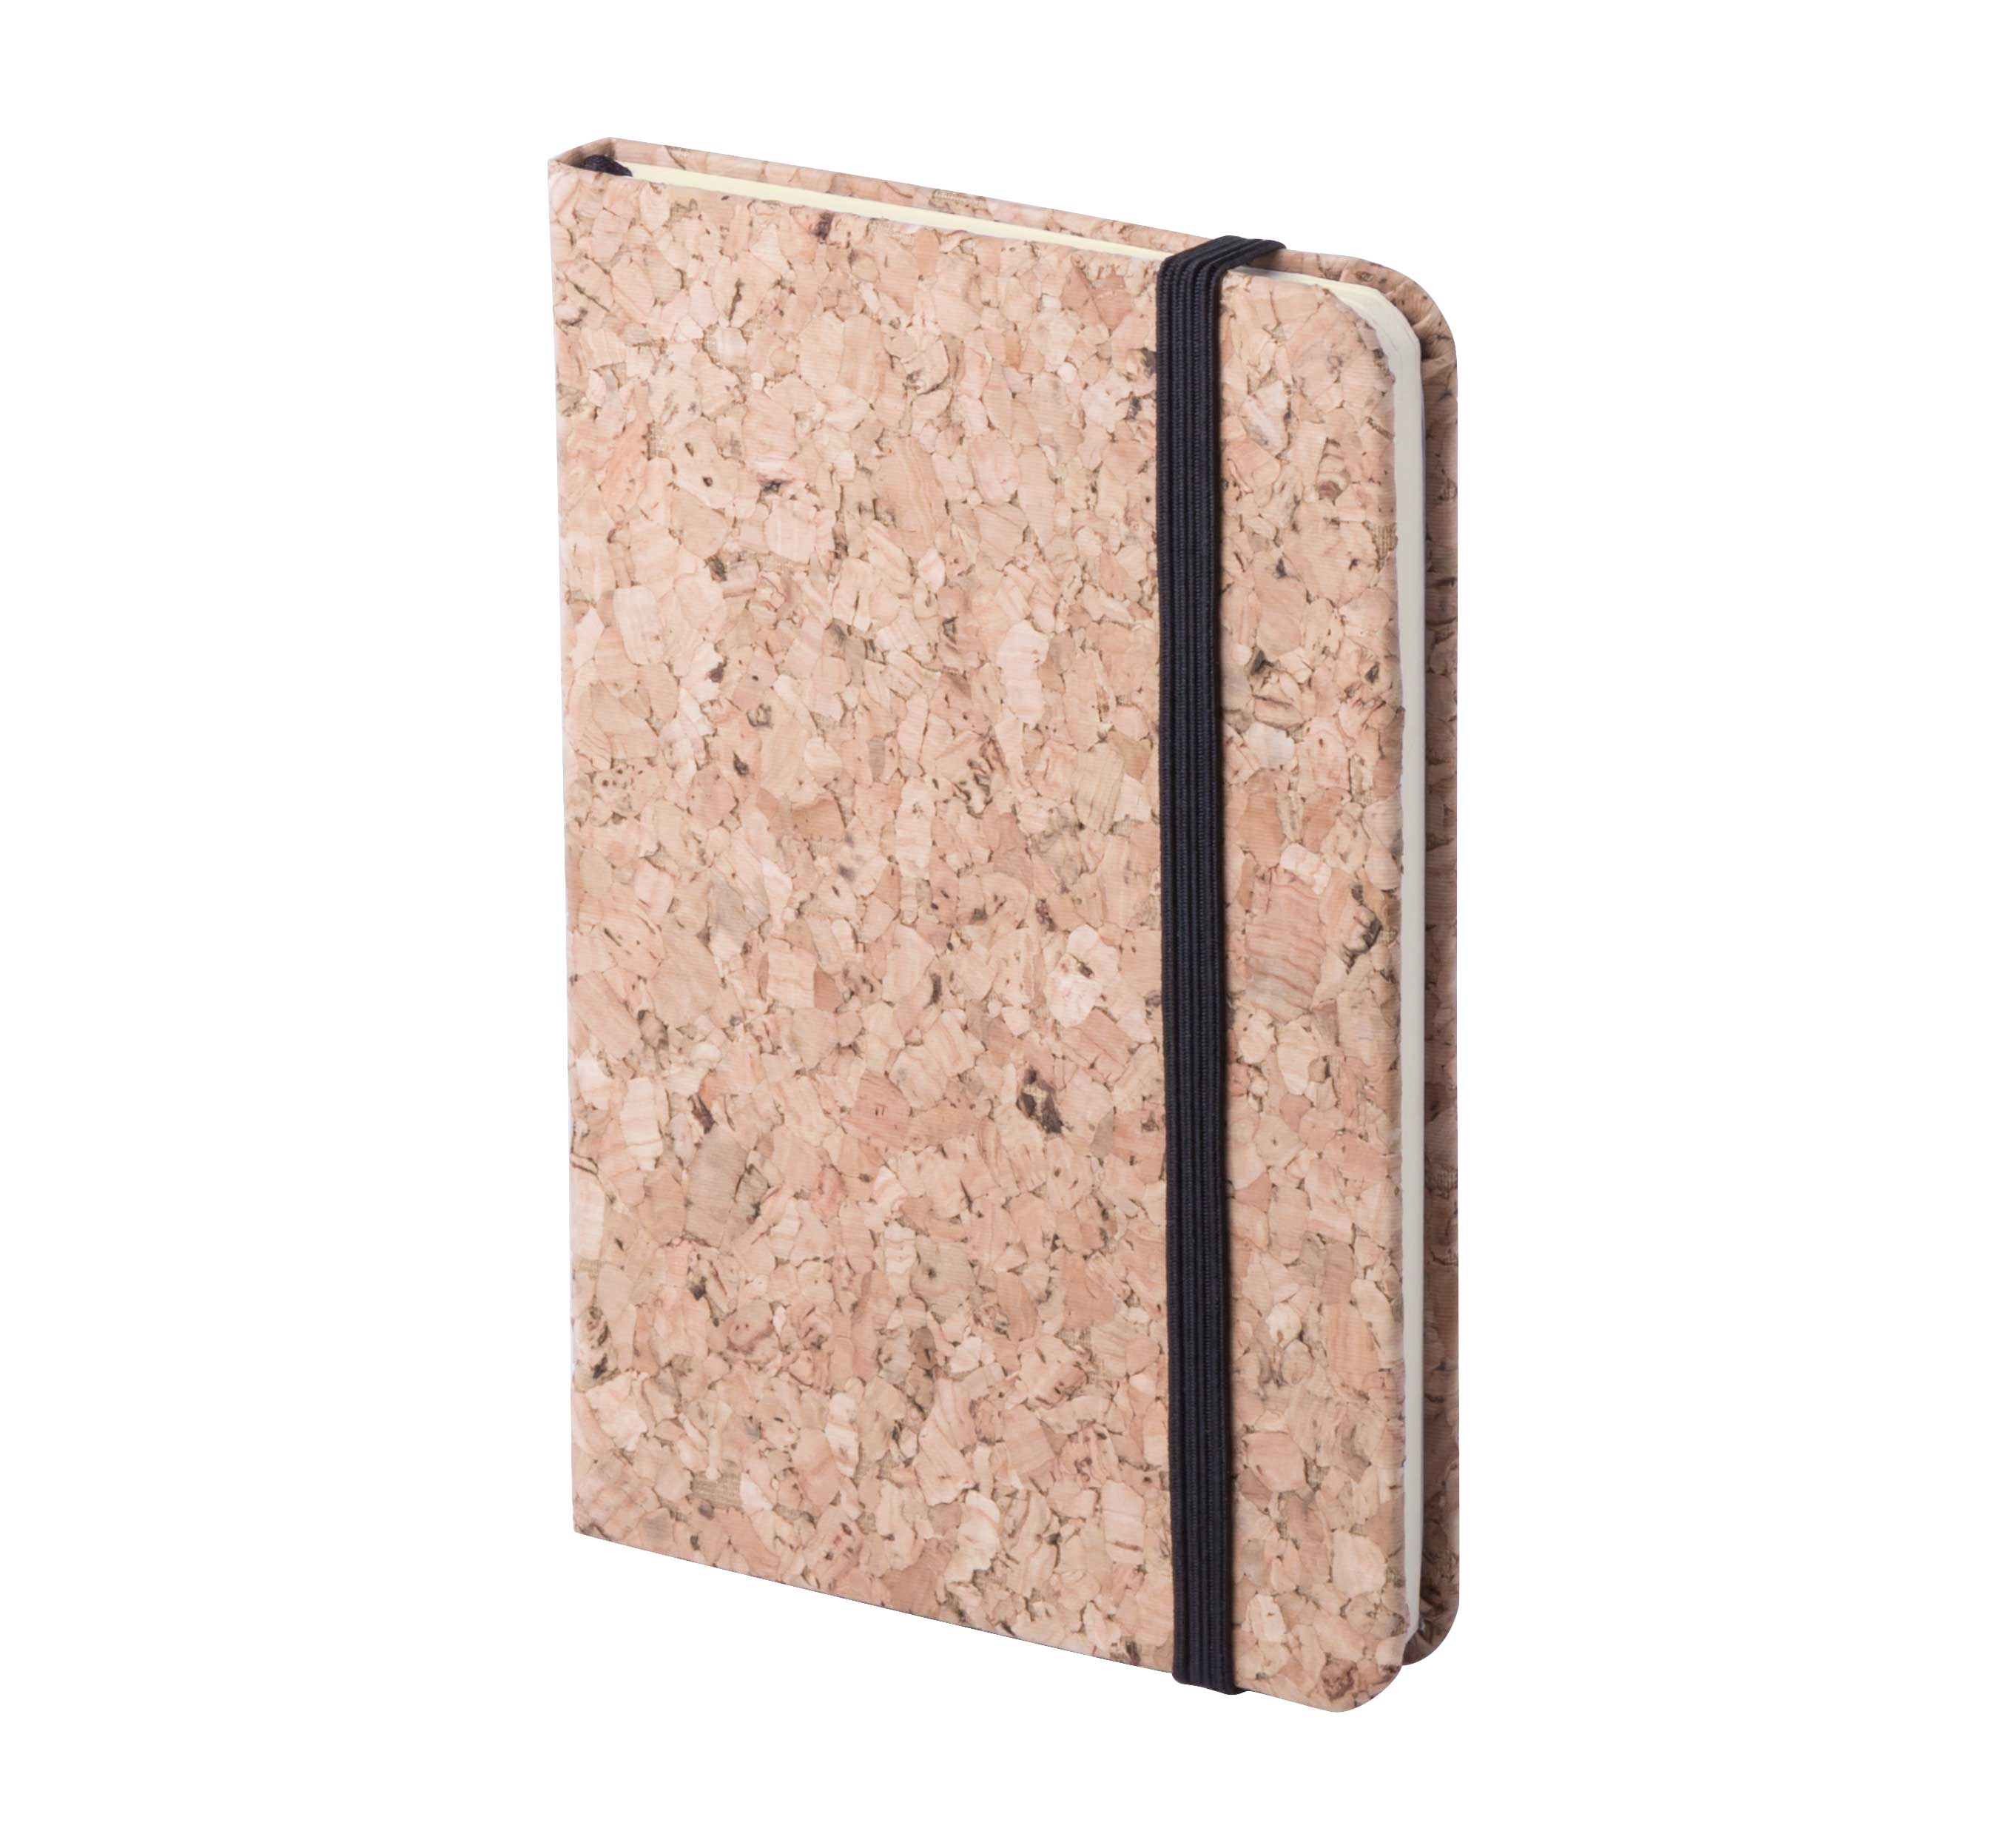 Notepad CLIMER with cork boards, format A6 - natural